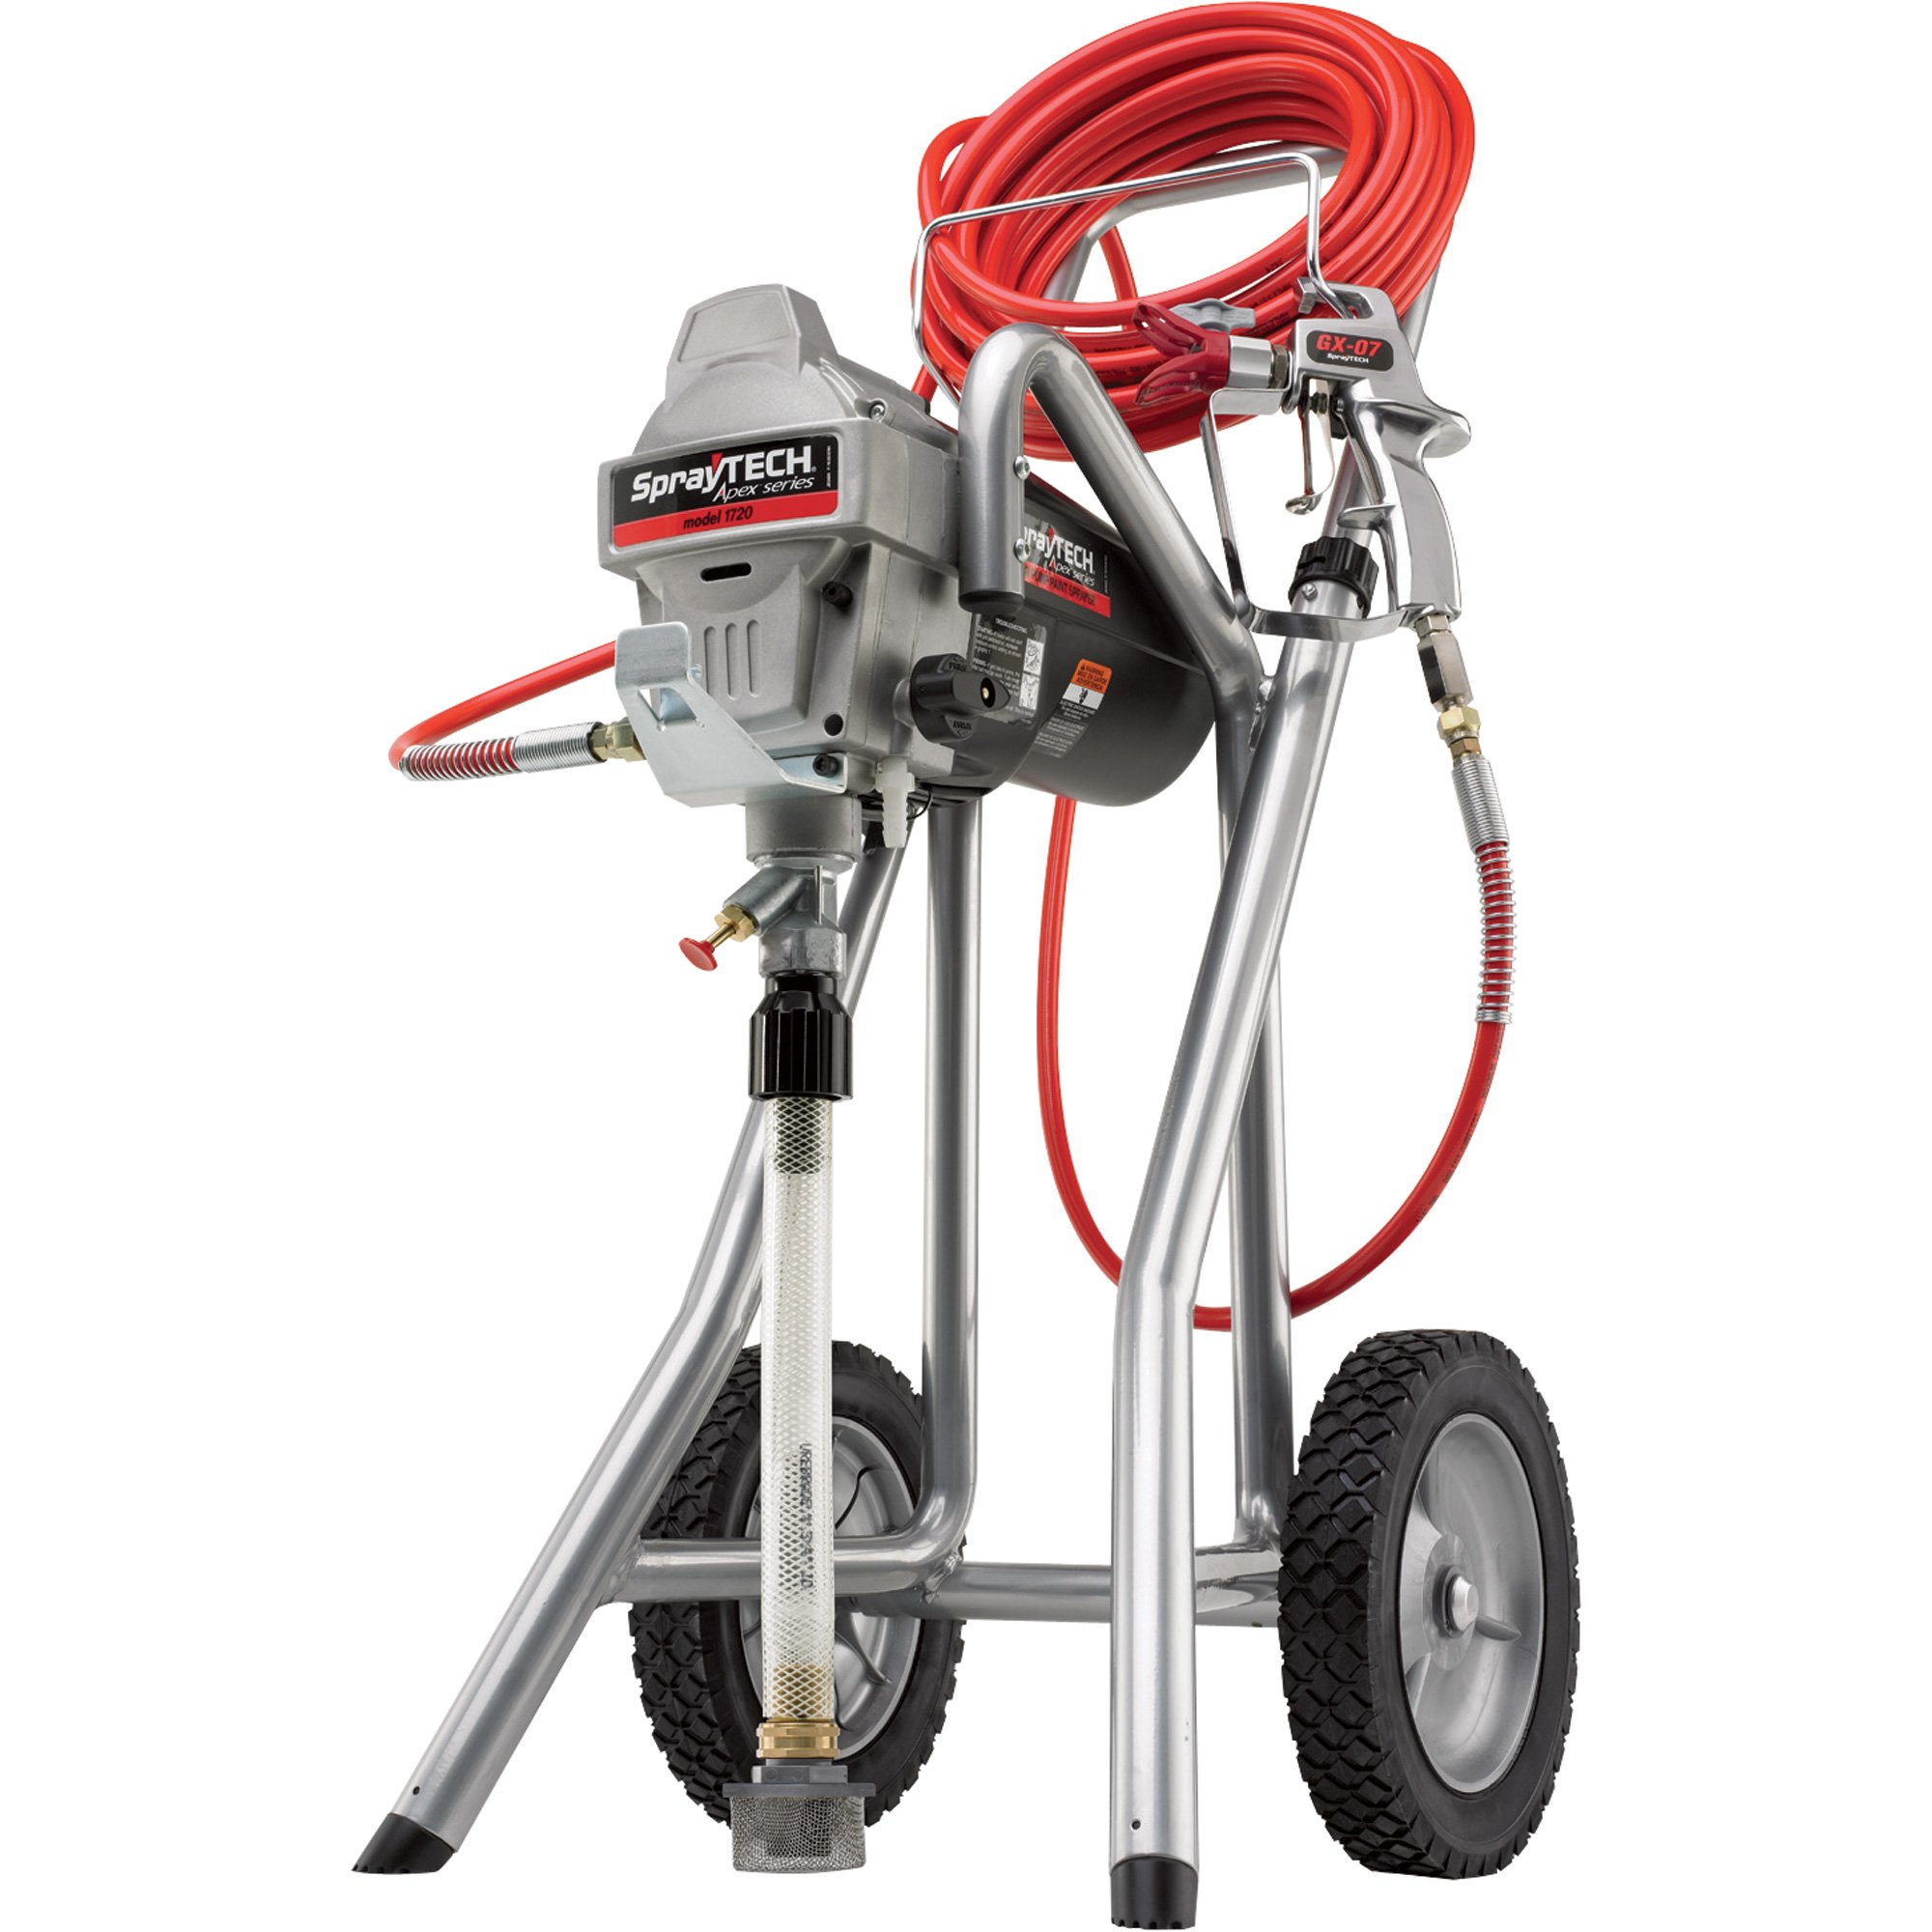 Wagner airless paint sprayer • Compare best prices »